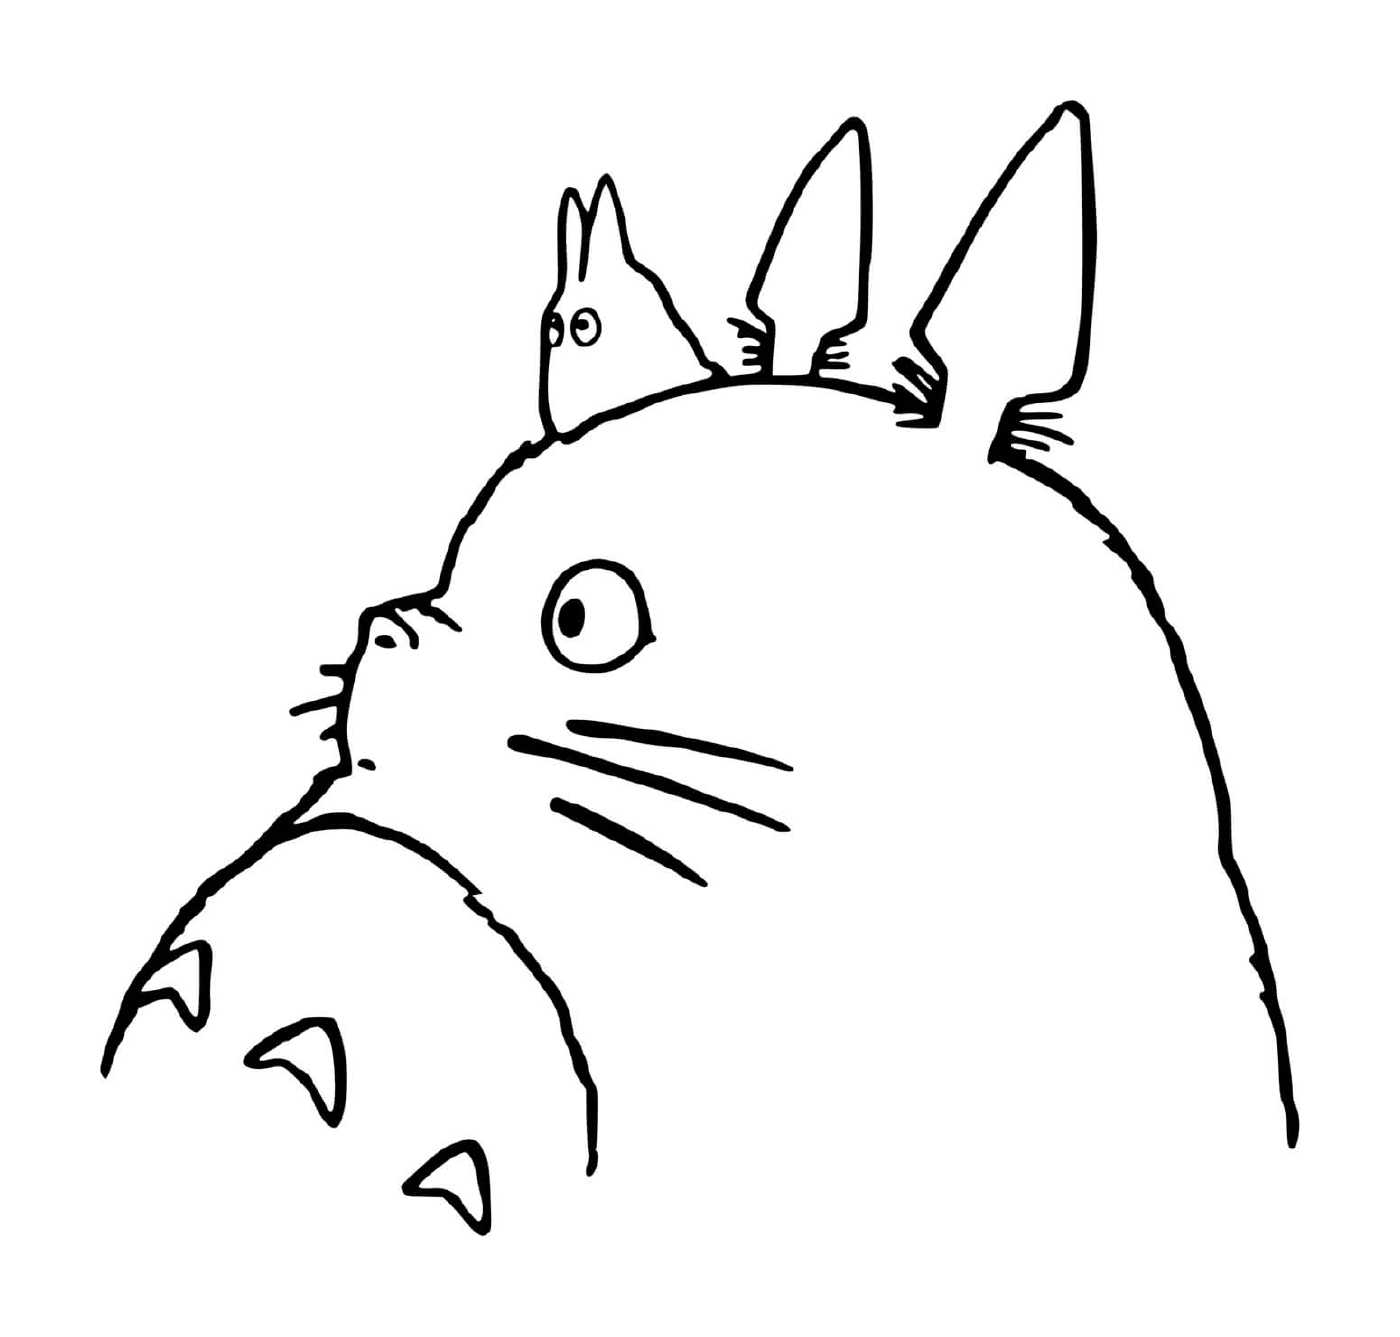  Totoro in black and white 